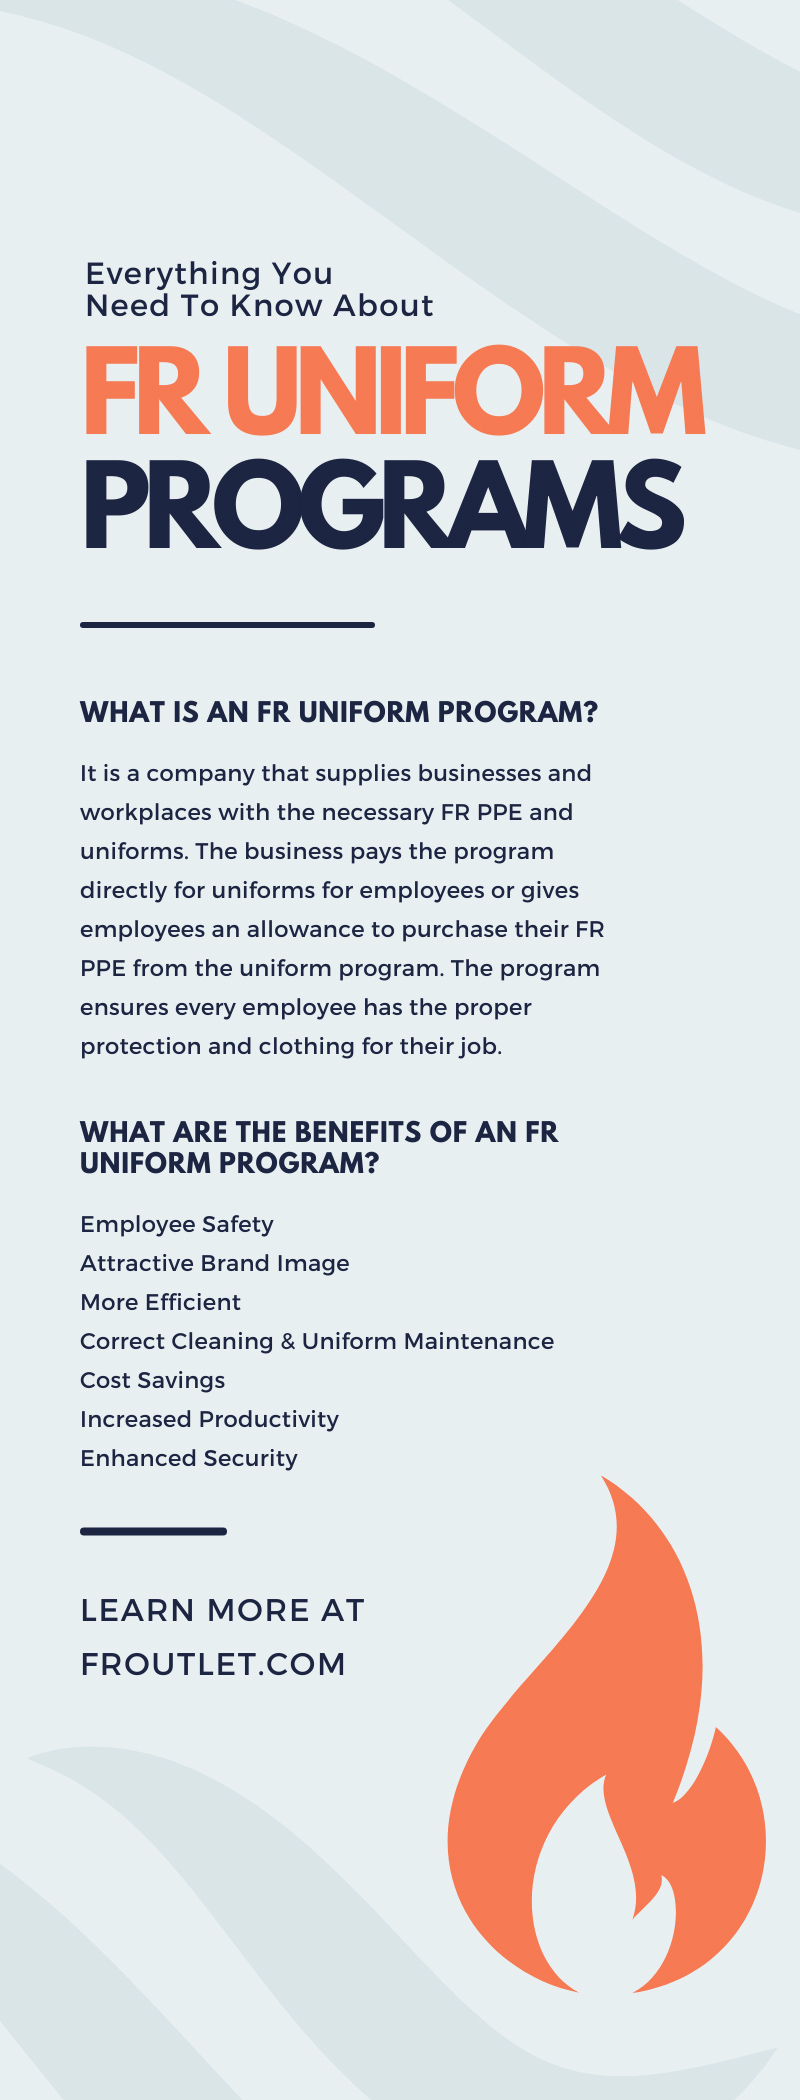 Everything You Need To Know About FR Uniform Programs